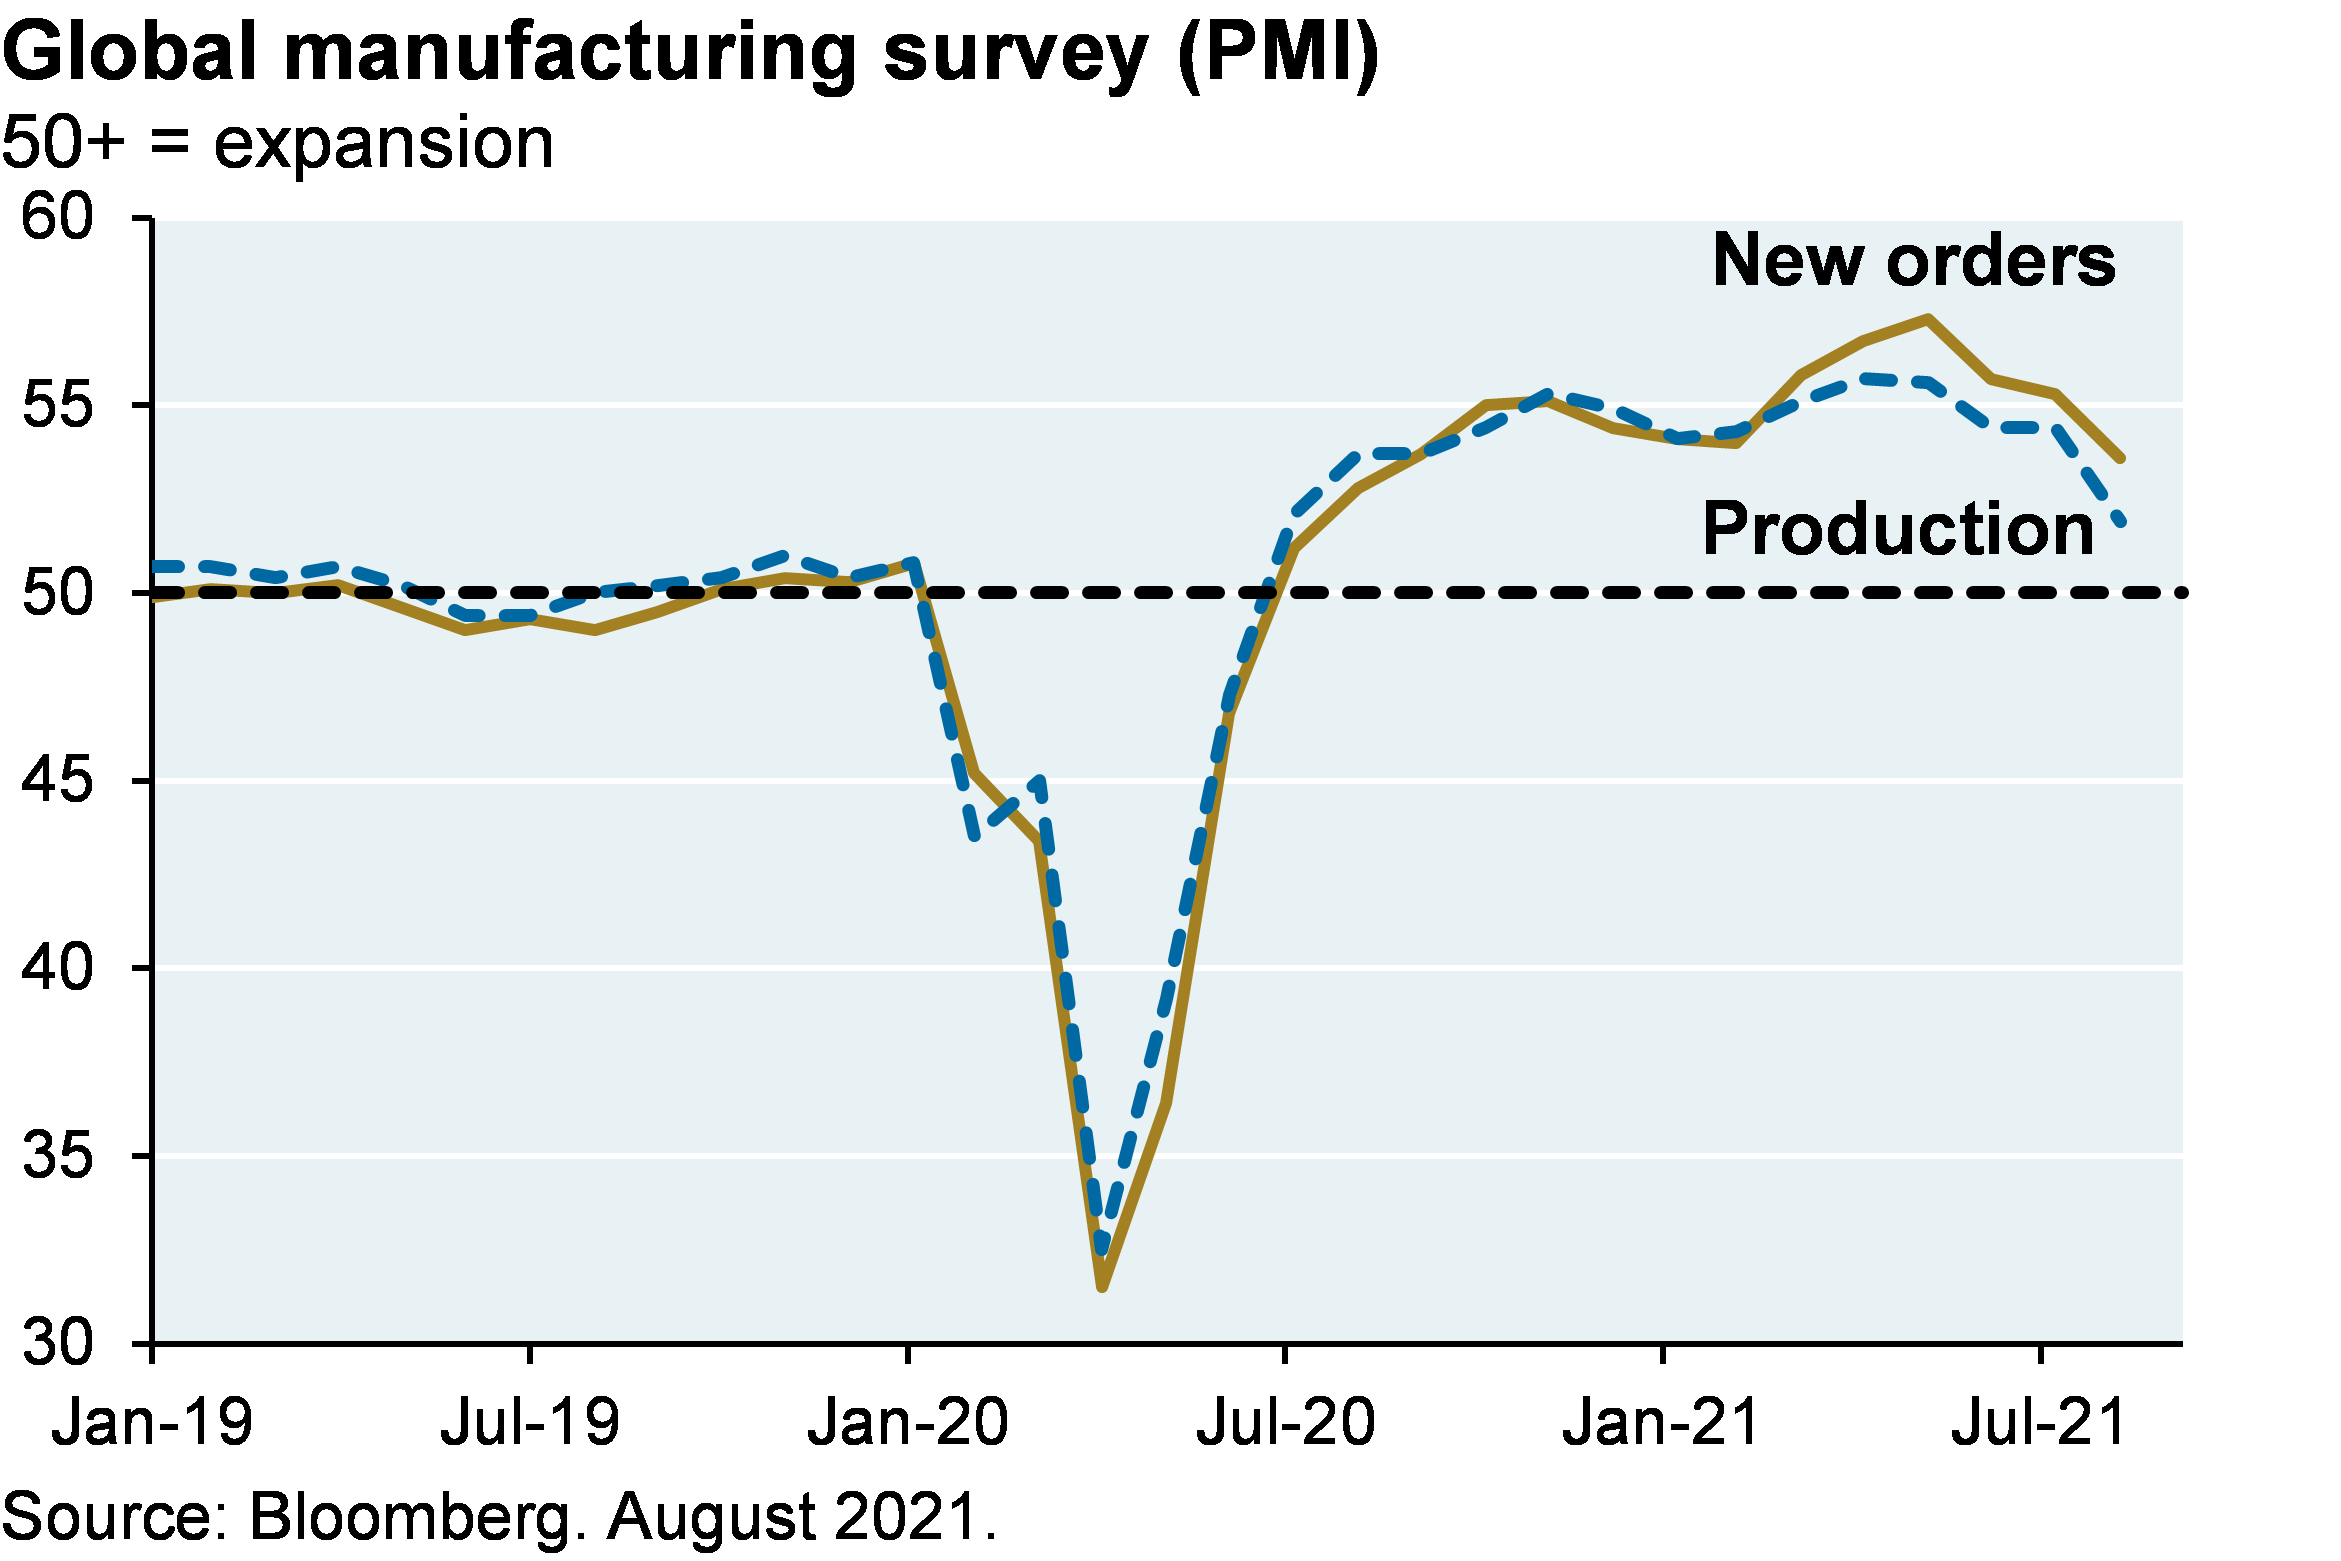 Line chart shows global manufacturing PMI, where a value of 50+ represents an expansion. Chart shows that manufacturing new orders and manufacturing production dropped to a value of nearly 30, steadily increased to 55, and have recently slightly declined, with new orders slightly below 55 and production at around 53.